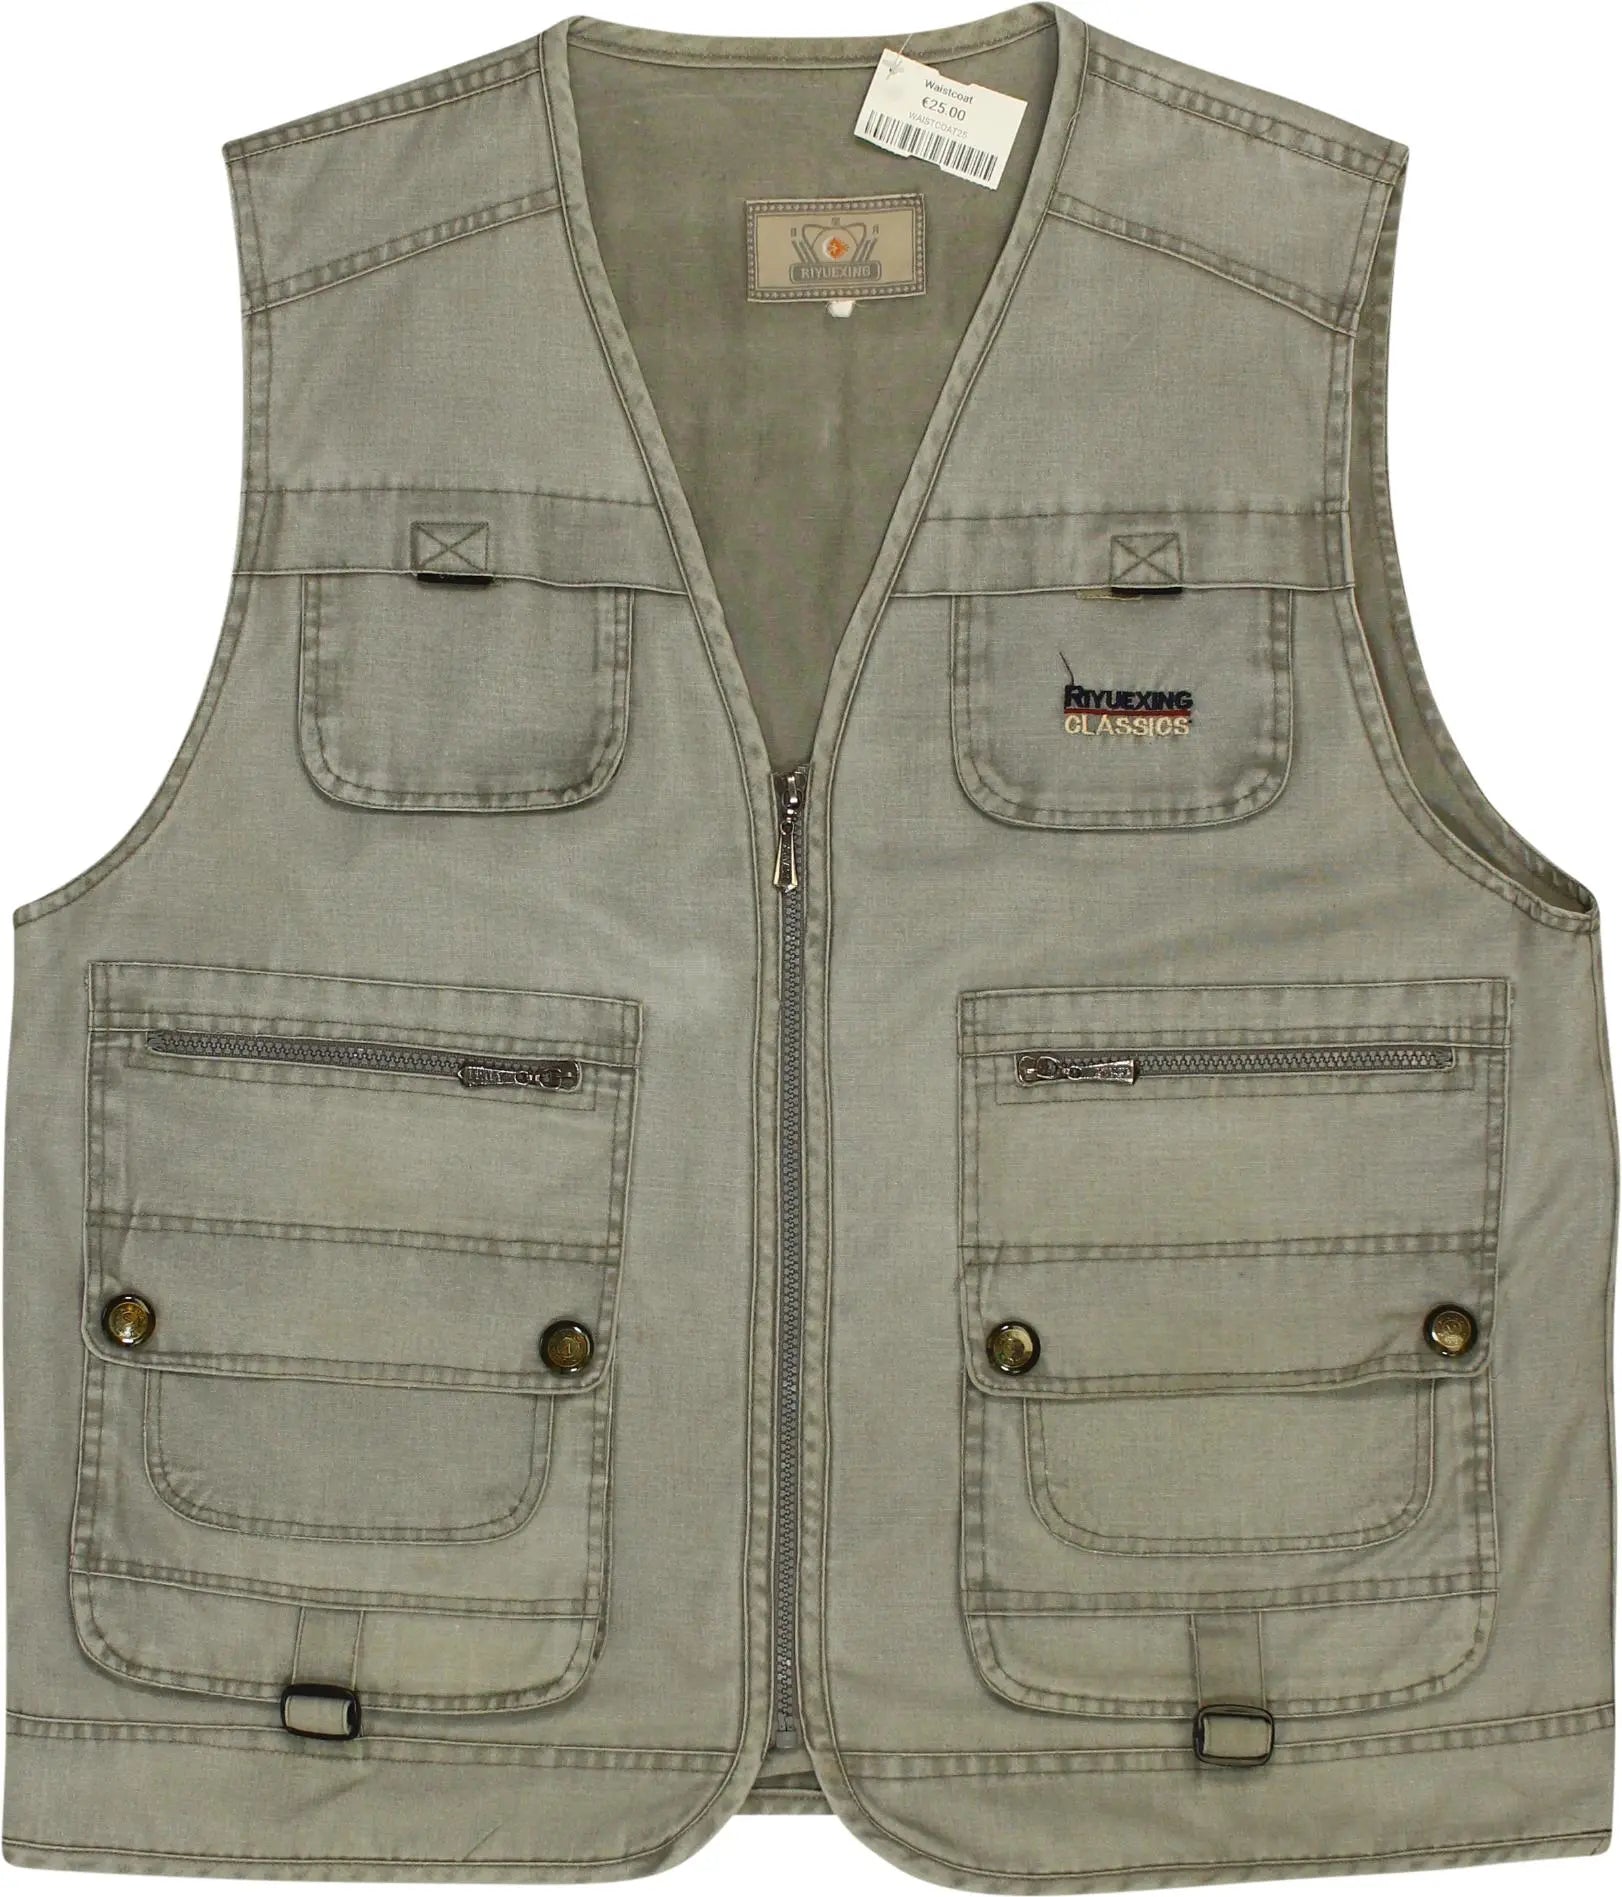 Riyuexing - Waistcoat- ThriftTale.com - Vintage and second handclothing